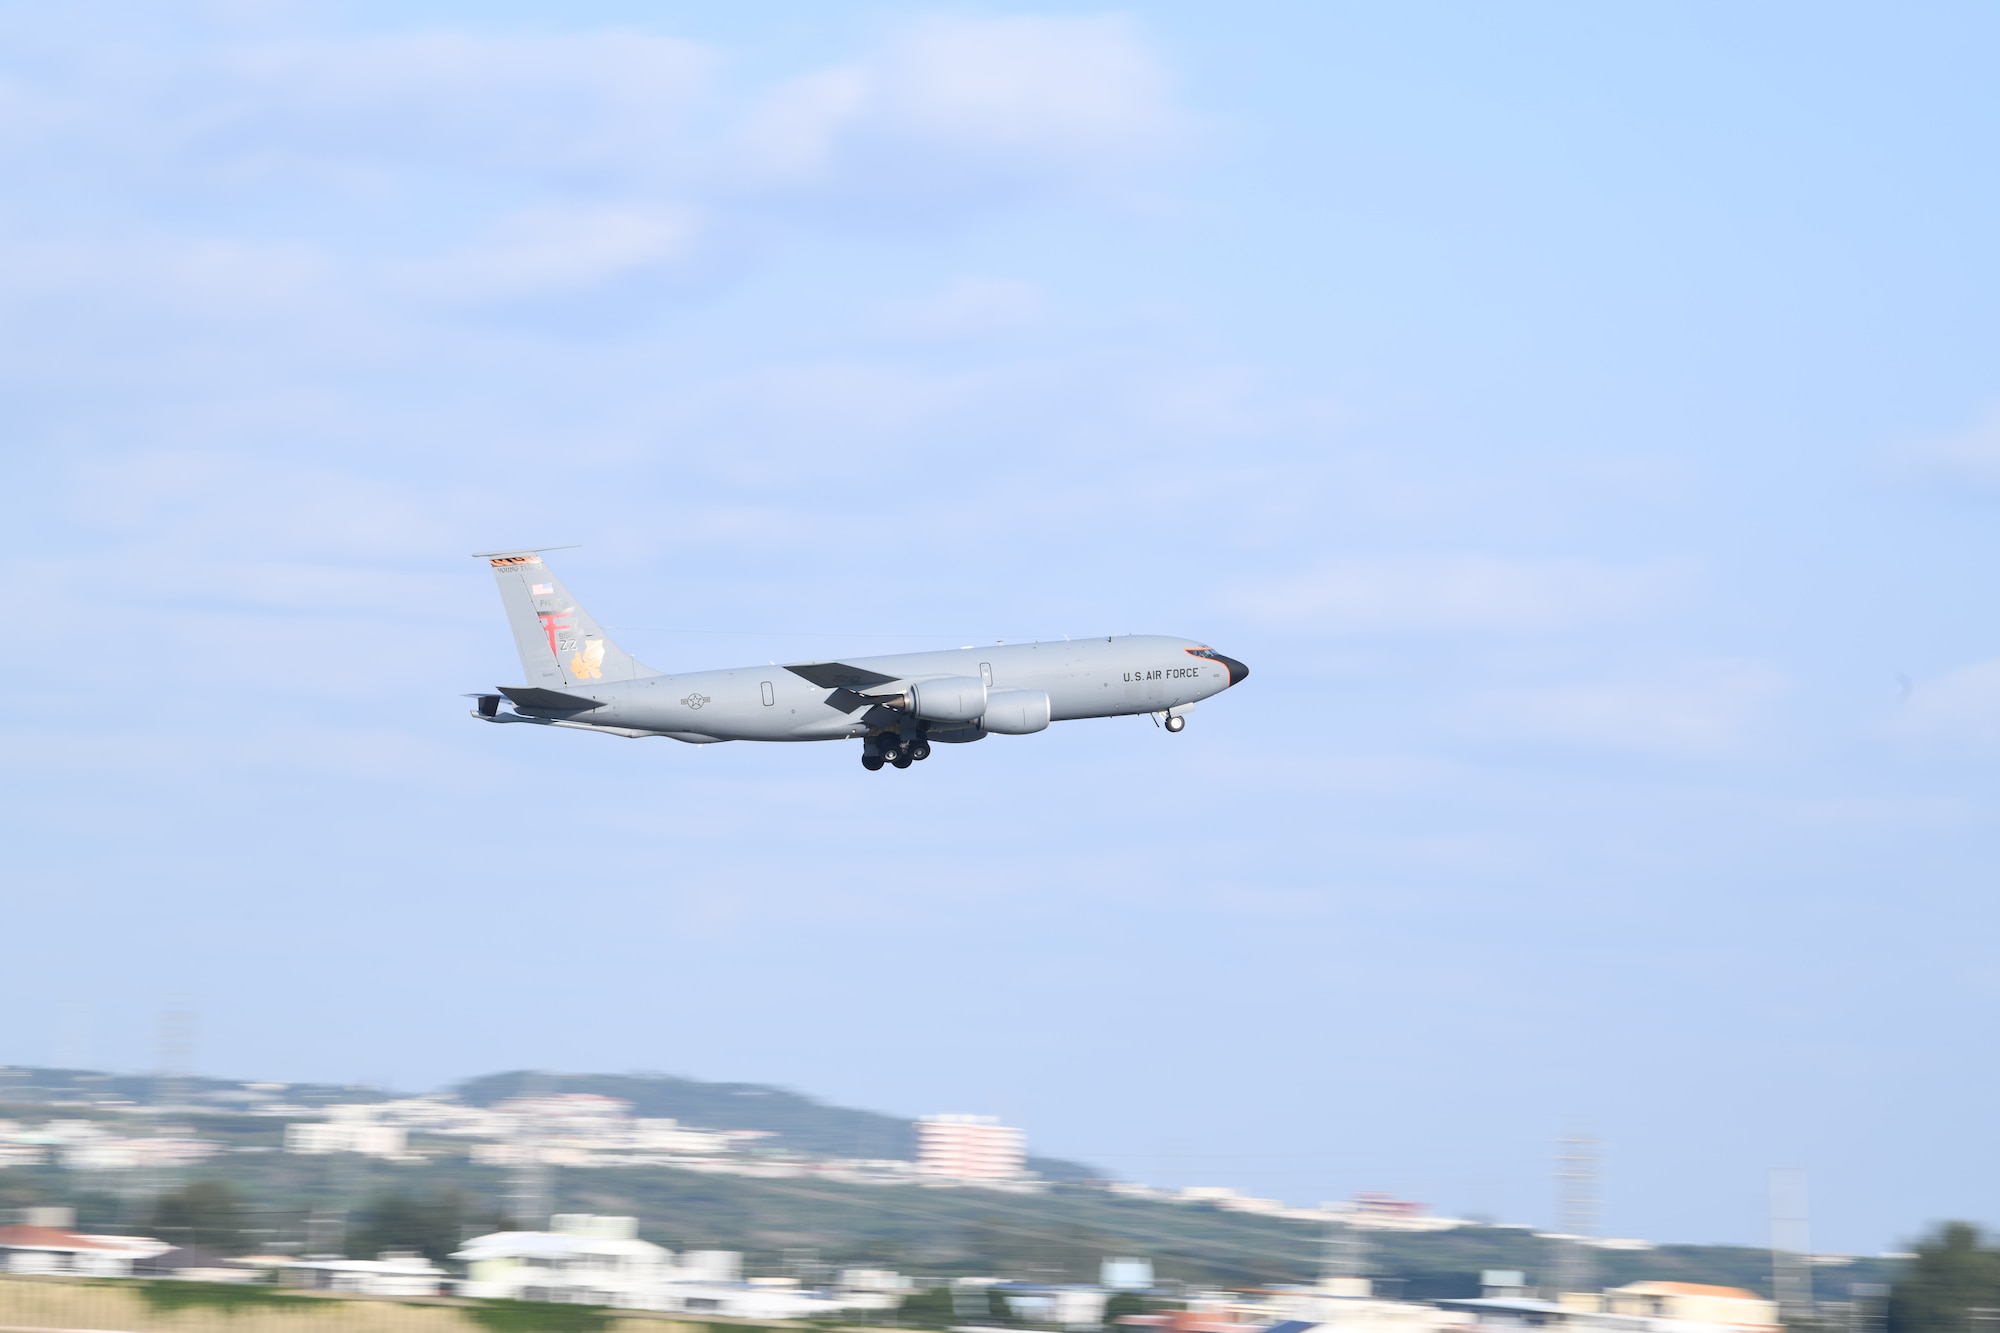 An aircraft takes off.